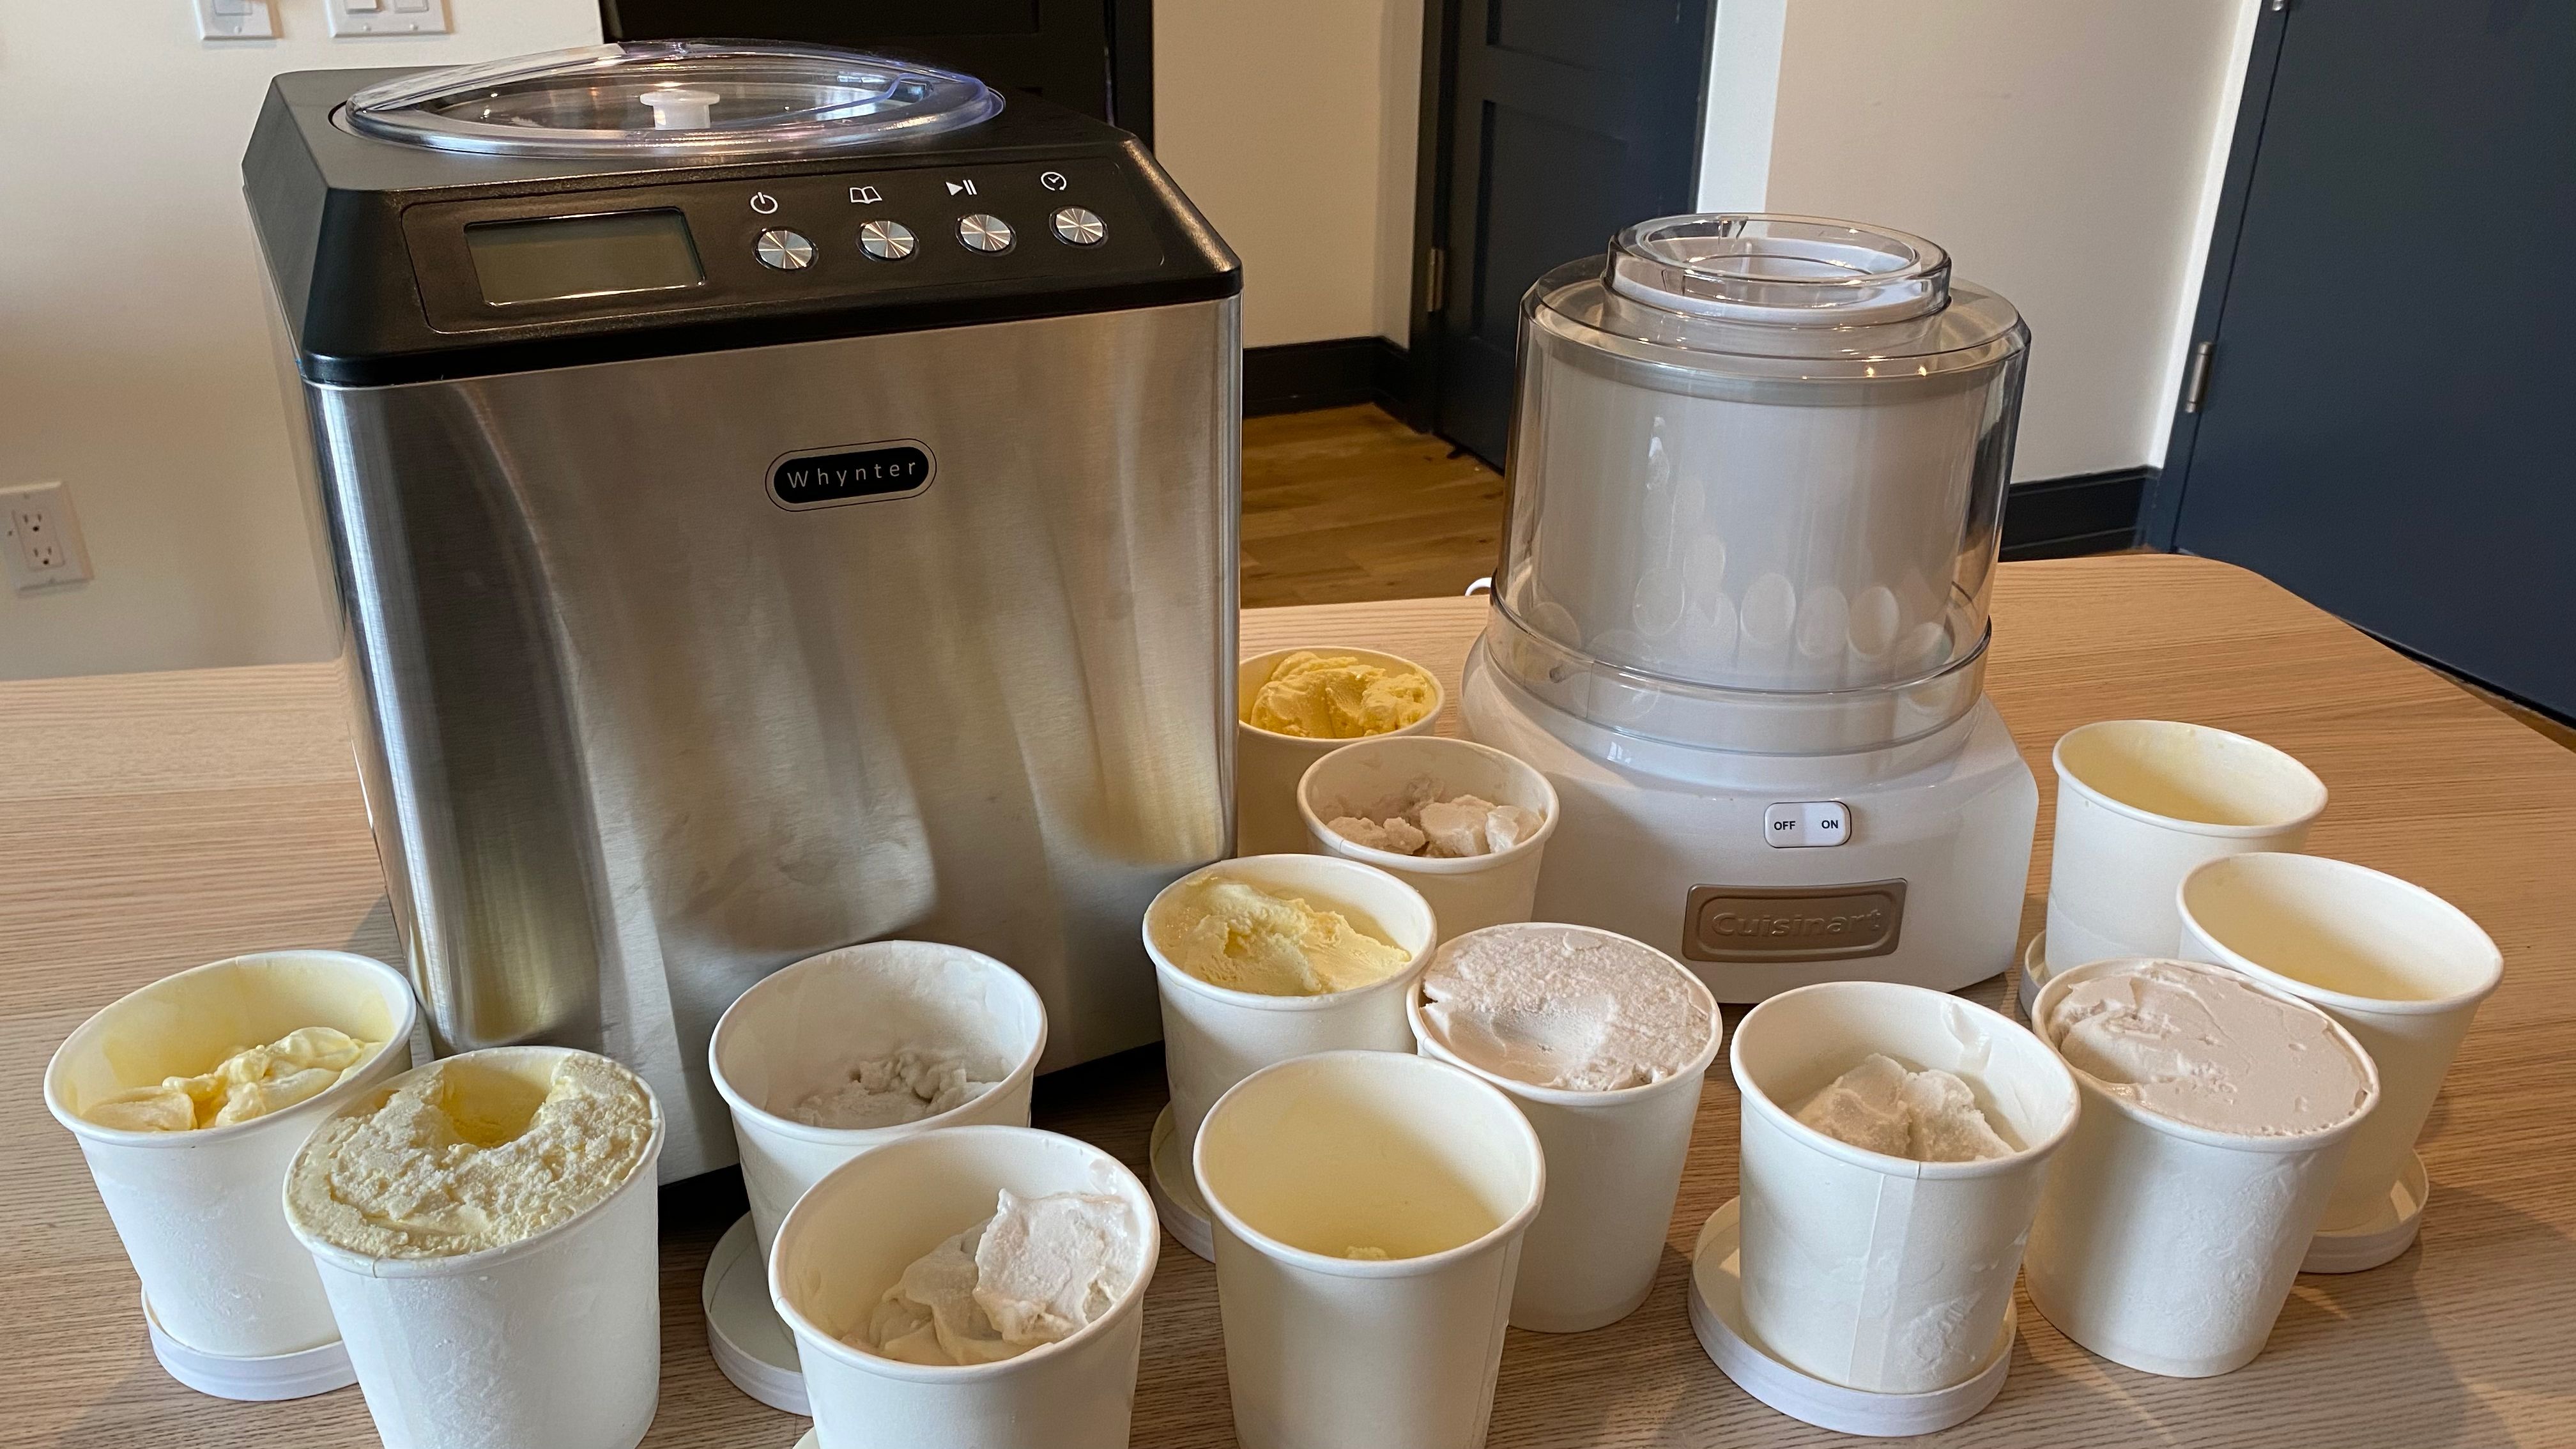 Do You Need the Cuisinart Soft Serve Ice Cream Maker? — The Kitchen Gadget  Test Show 